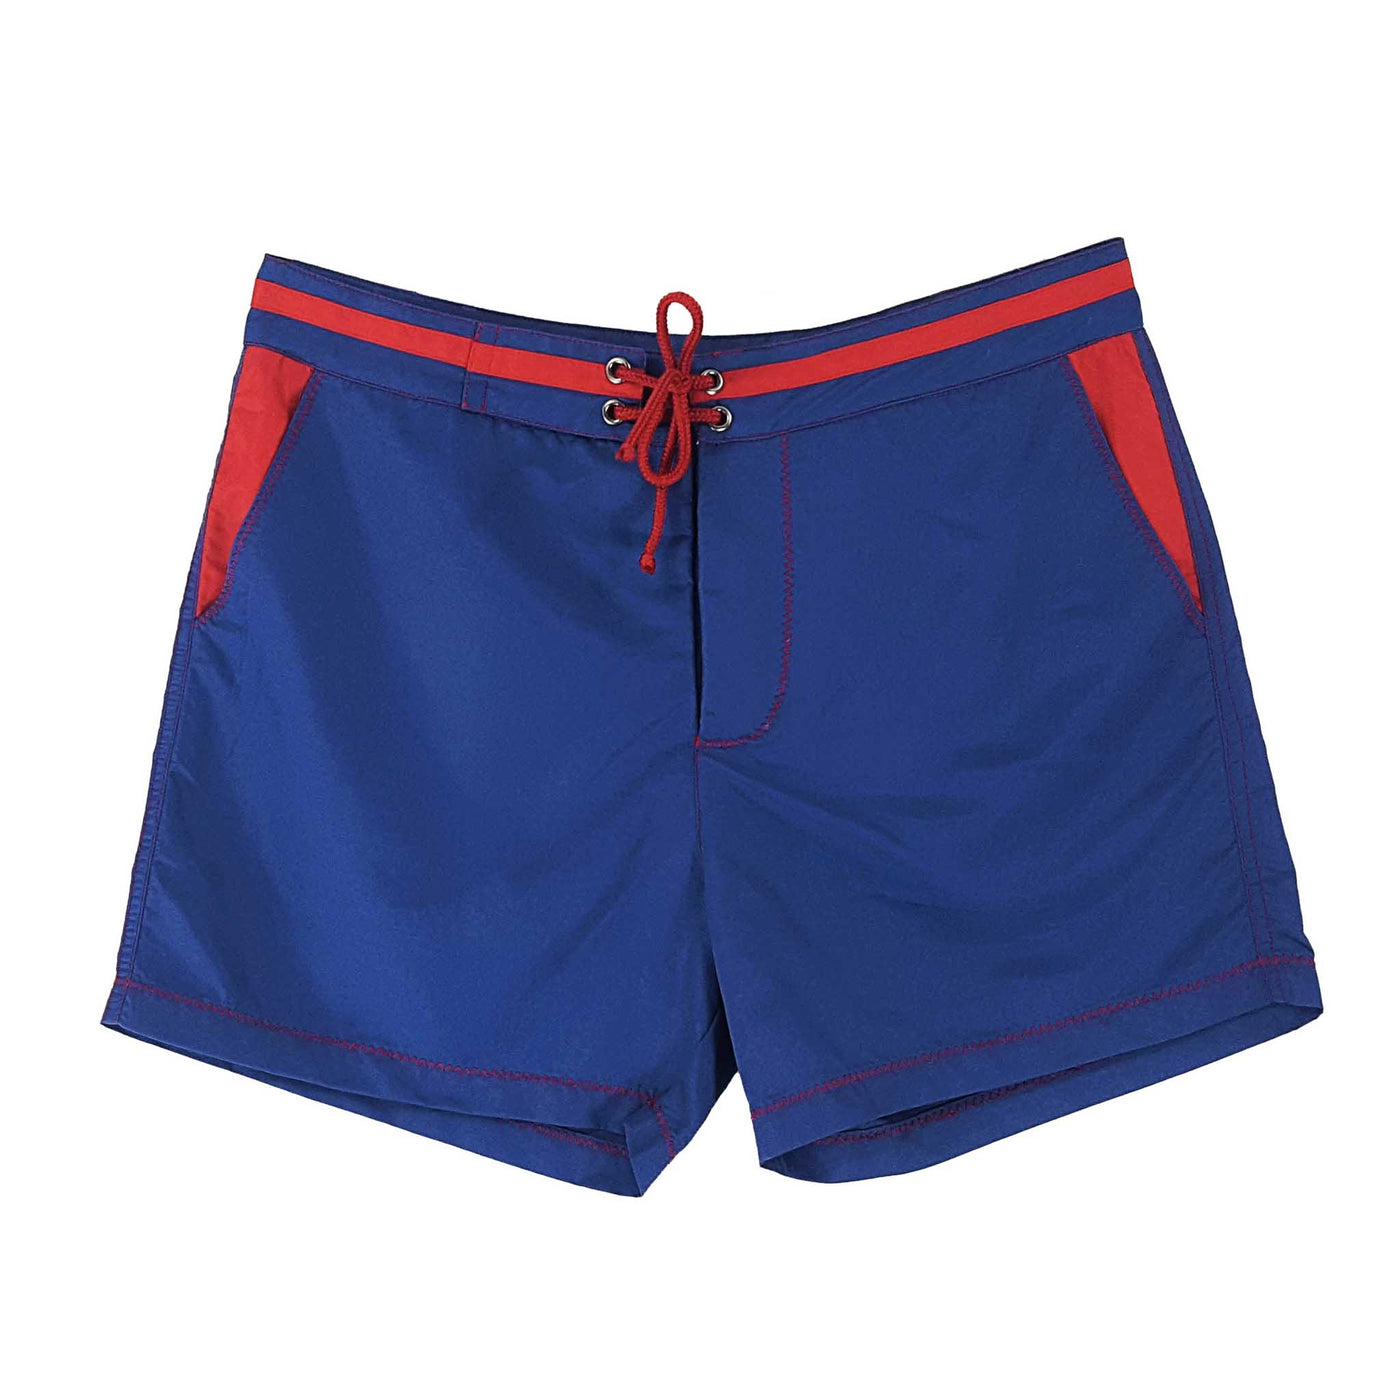 Navy blue men's recycled swim shorts with red details